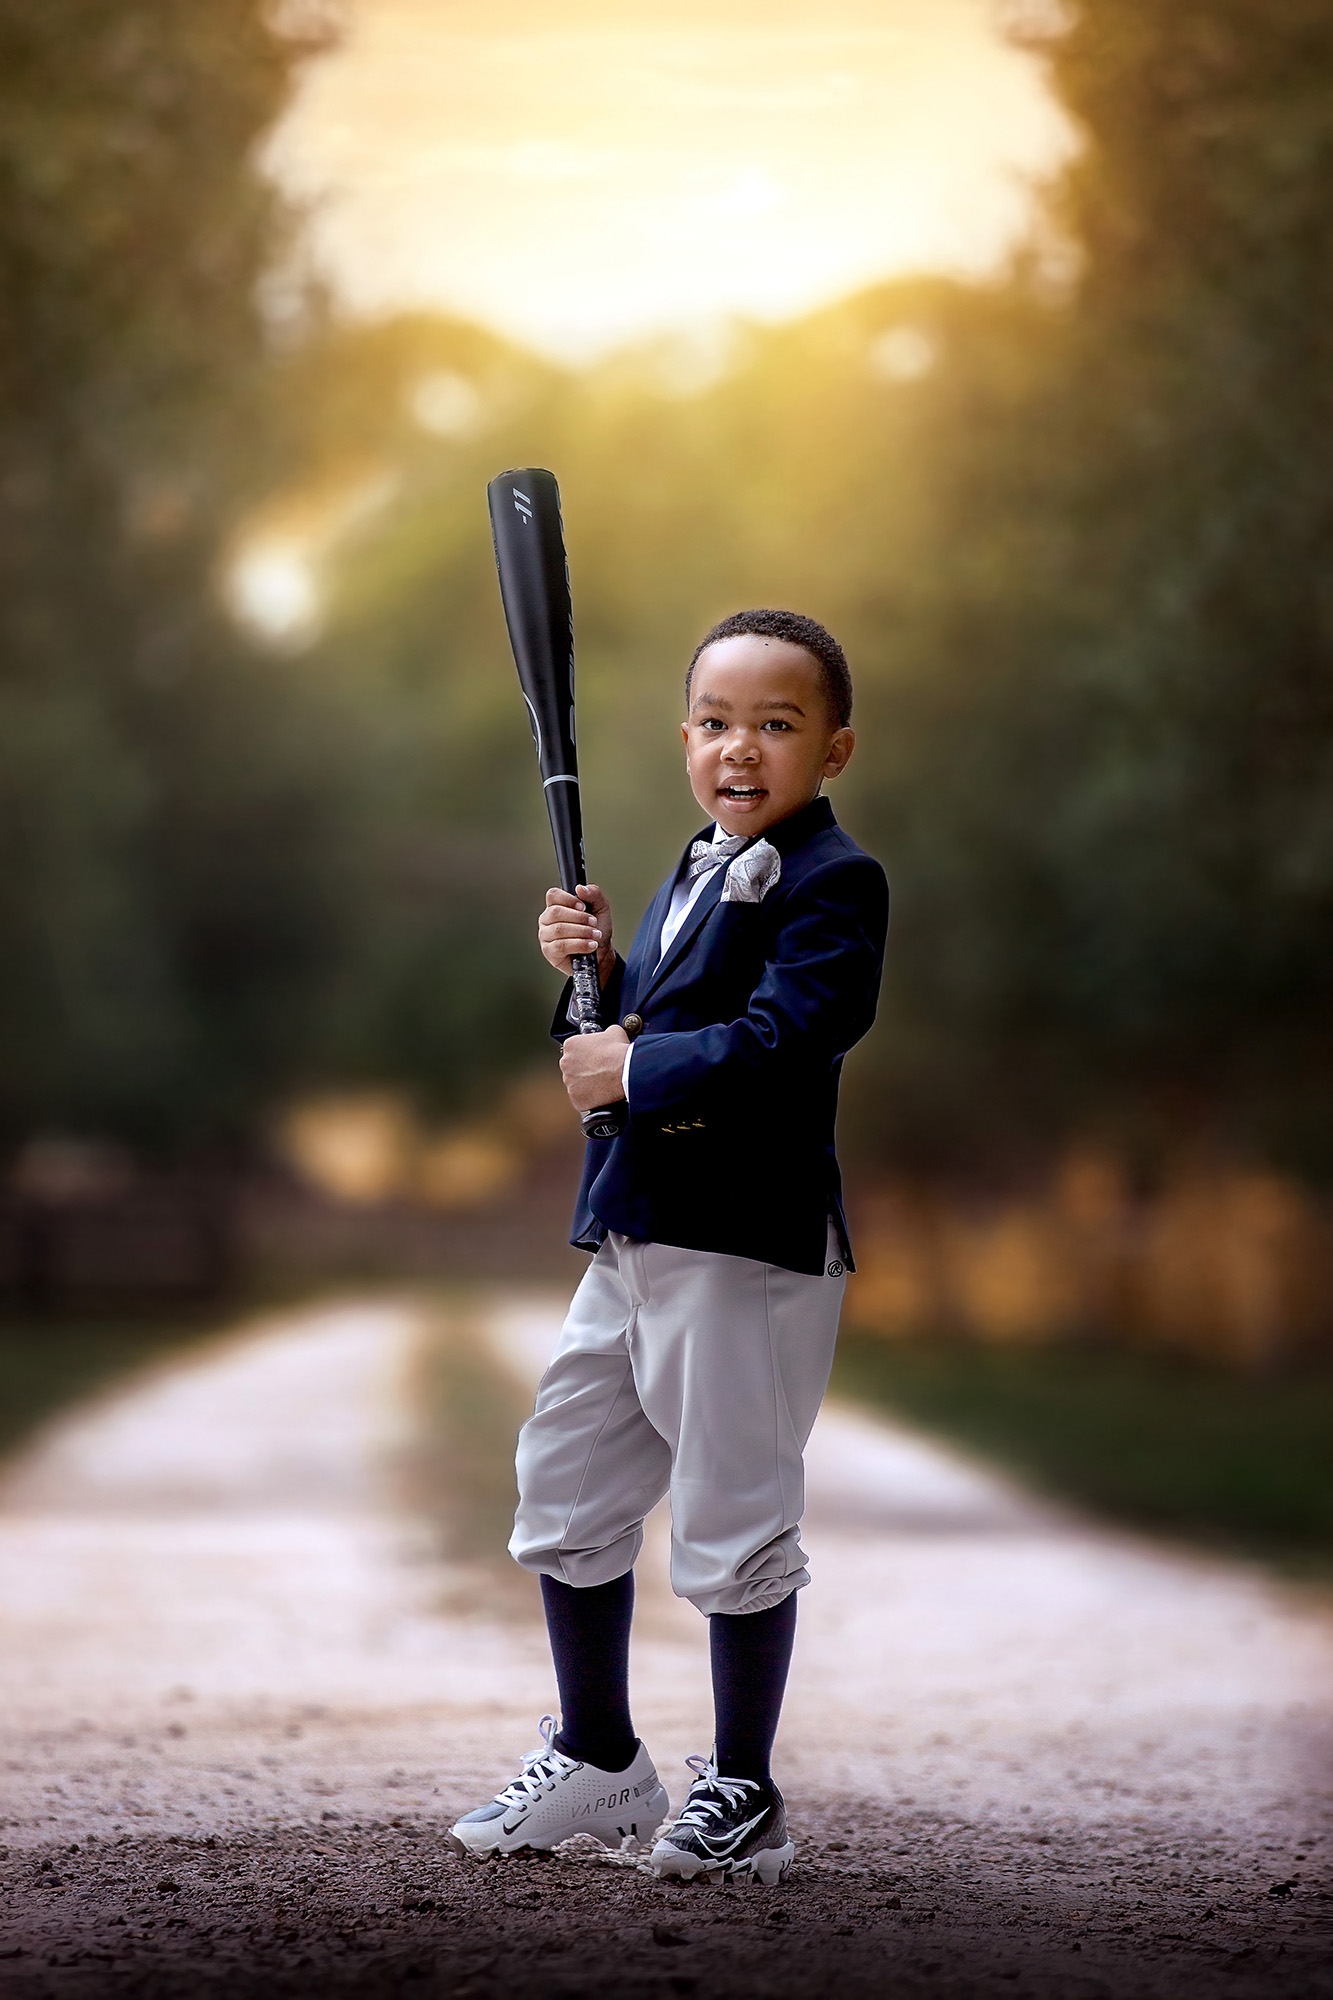 Adorable and stylish little boy dressed in a suit and sports clothes with his baseball gear going to one of the indoor playgrounds in Houston.